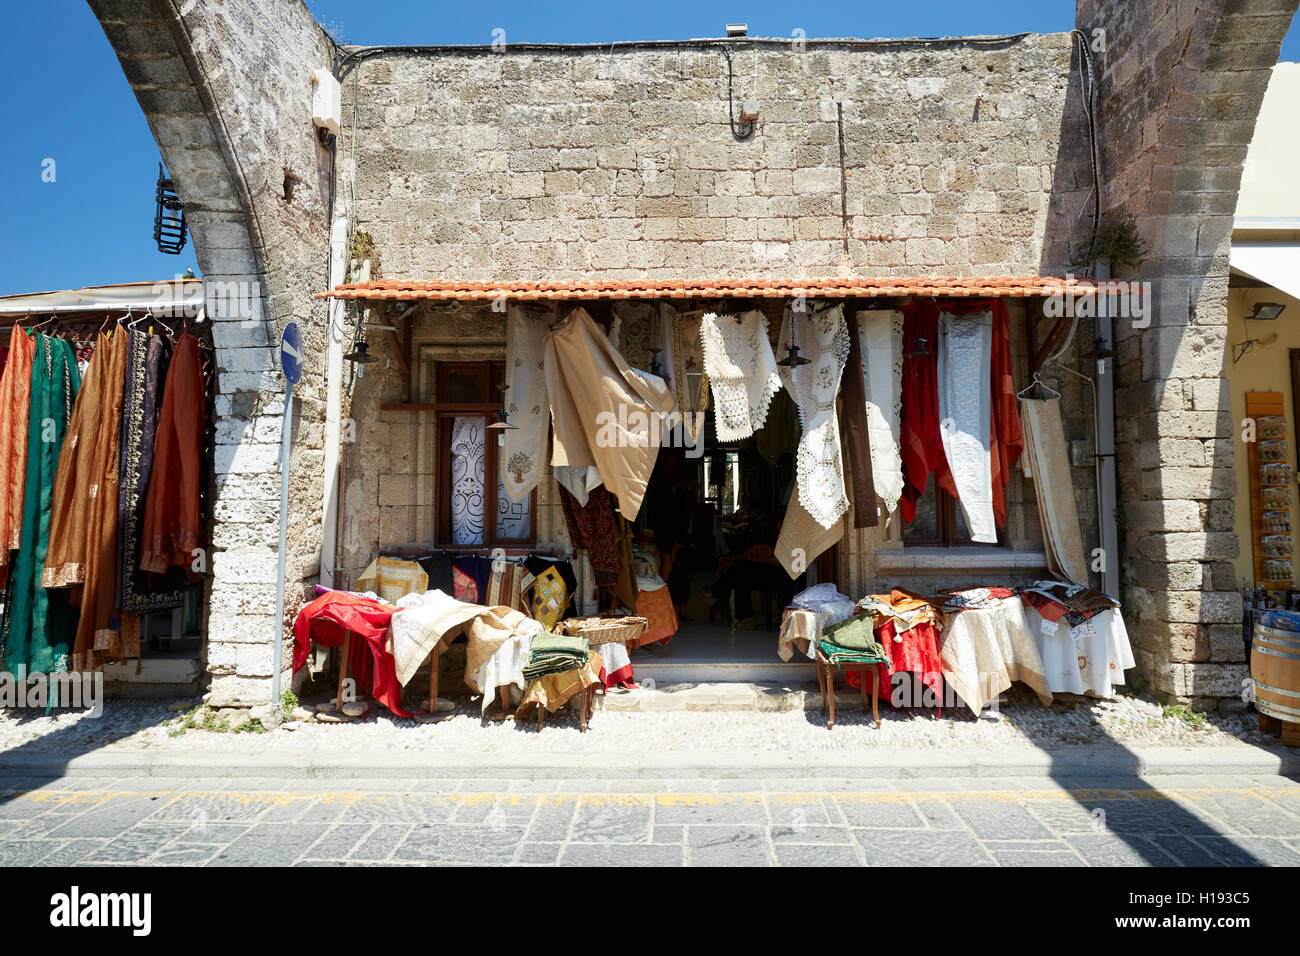 Shop sellers items in Rhodes Town, Greece Stock Photo